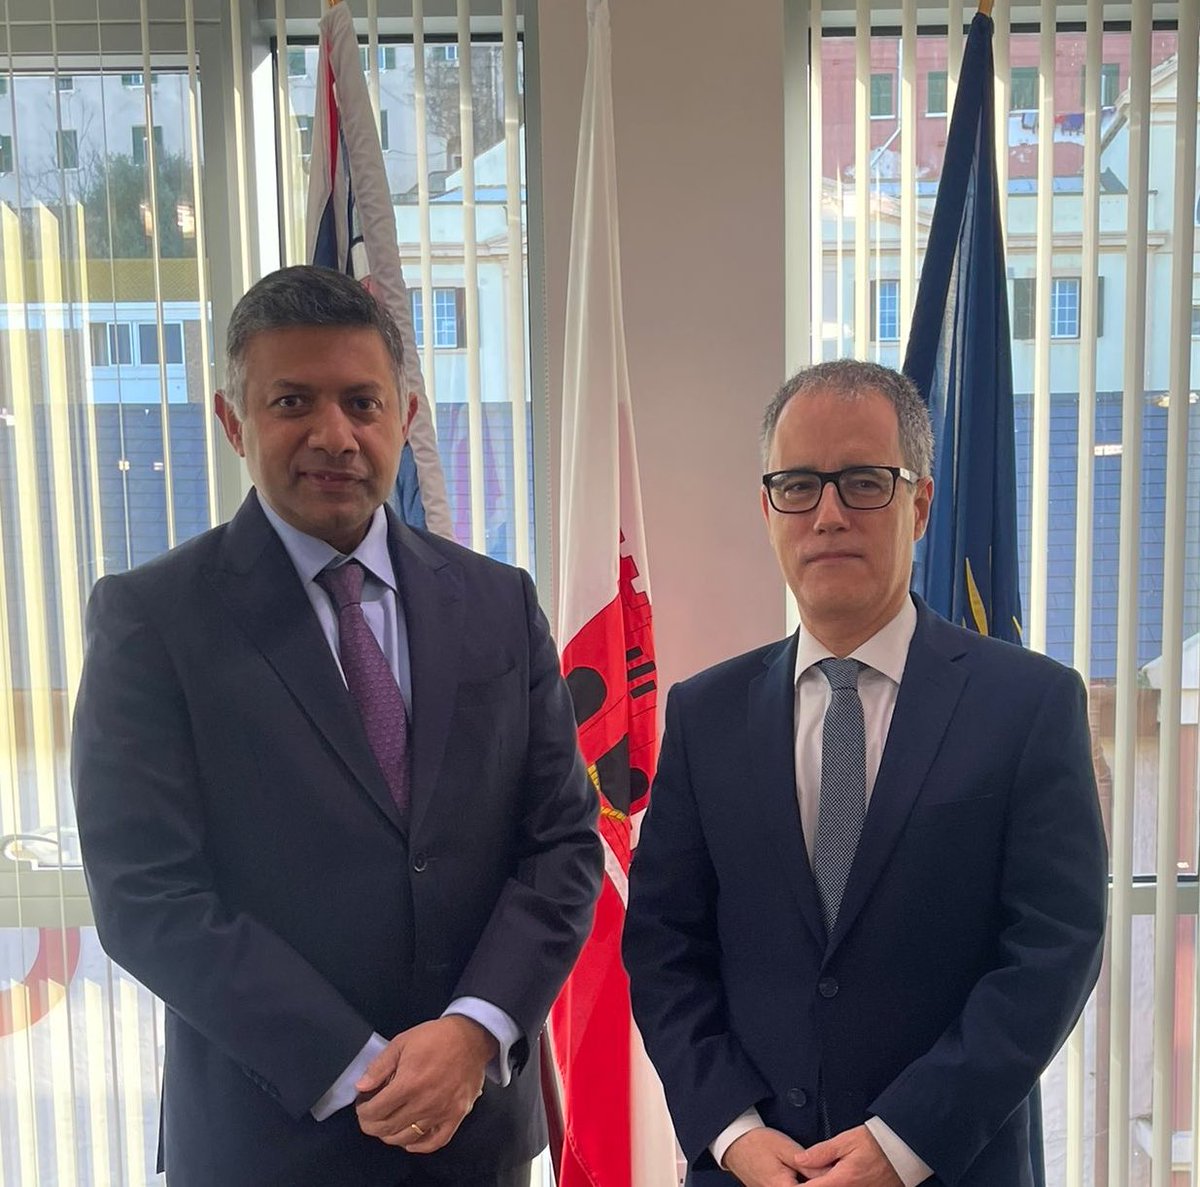 HC @VDoraiswami also met Dy CM of @GibraltarGov Hon Dr Joseph Garcia CMG. Apart from travel facilitation, they discussed ties in IT and financial services and . (2/4) @MEAIndia @IndianDiplomacy @sujitjoyghosh